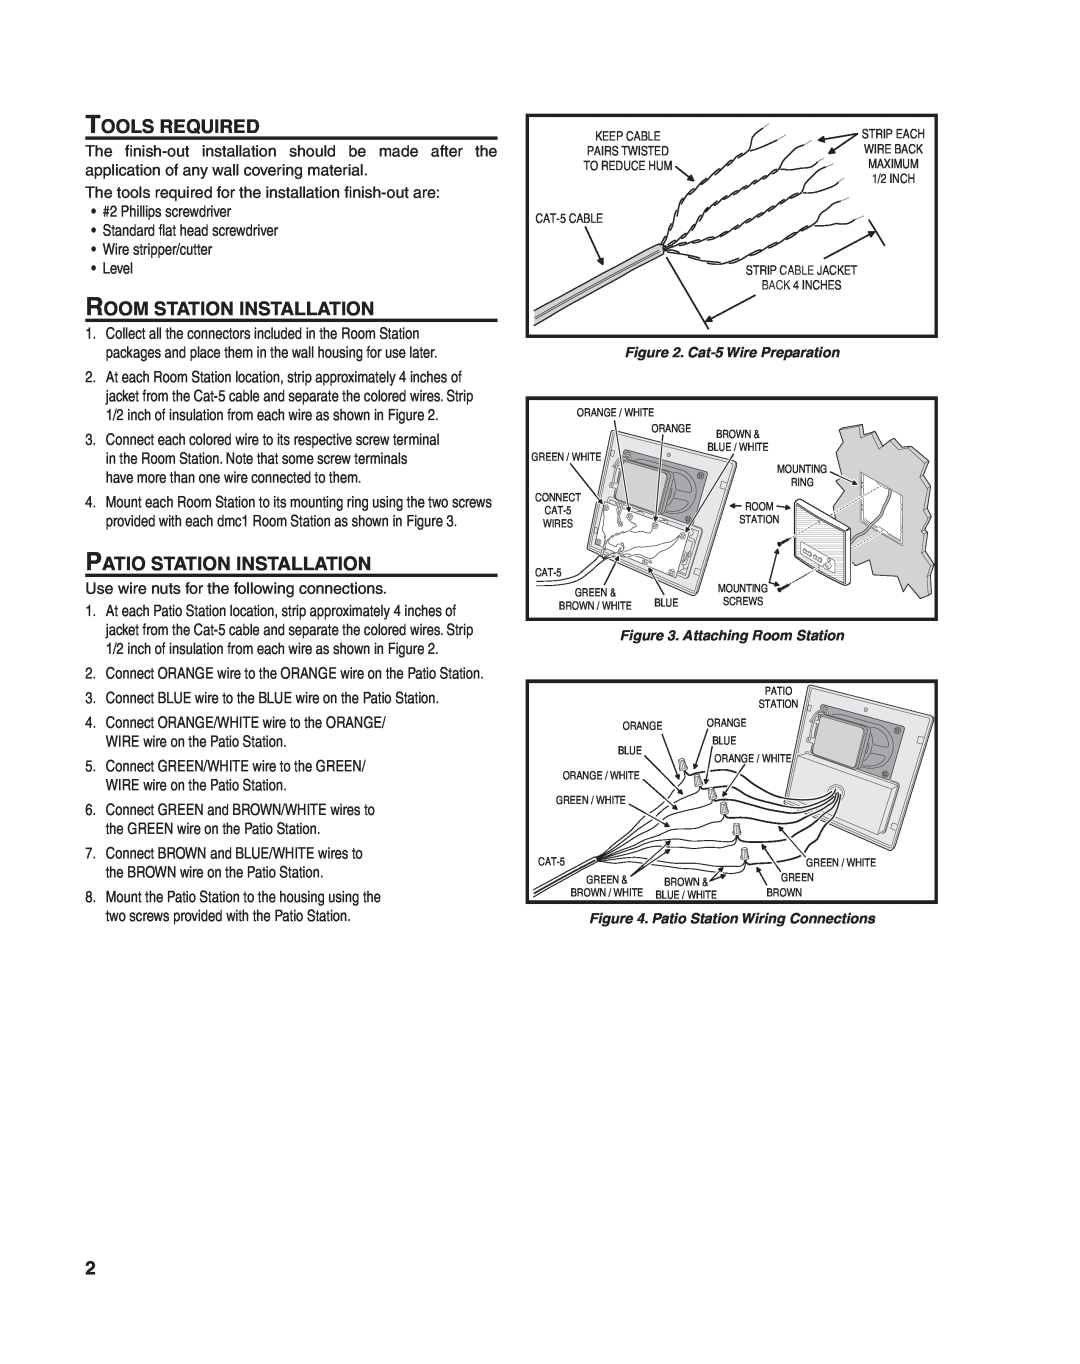 M&S Systems DMC1HC important safety instructions Tools Required, Room Station Installation, Patio Station Installation 